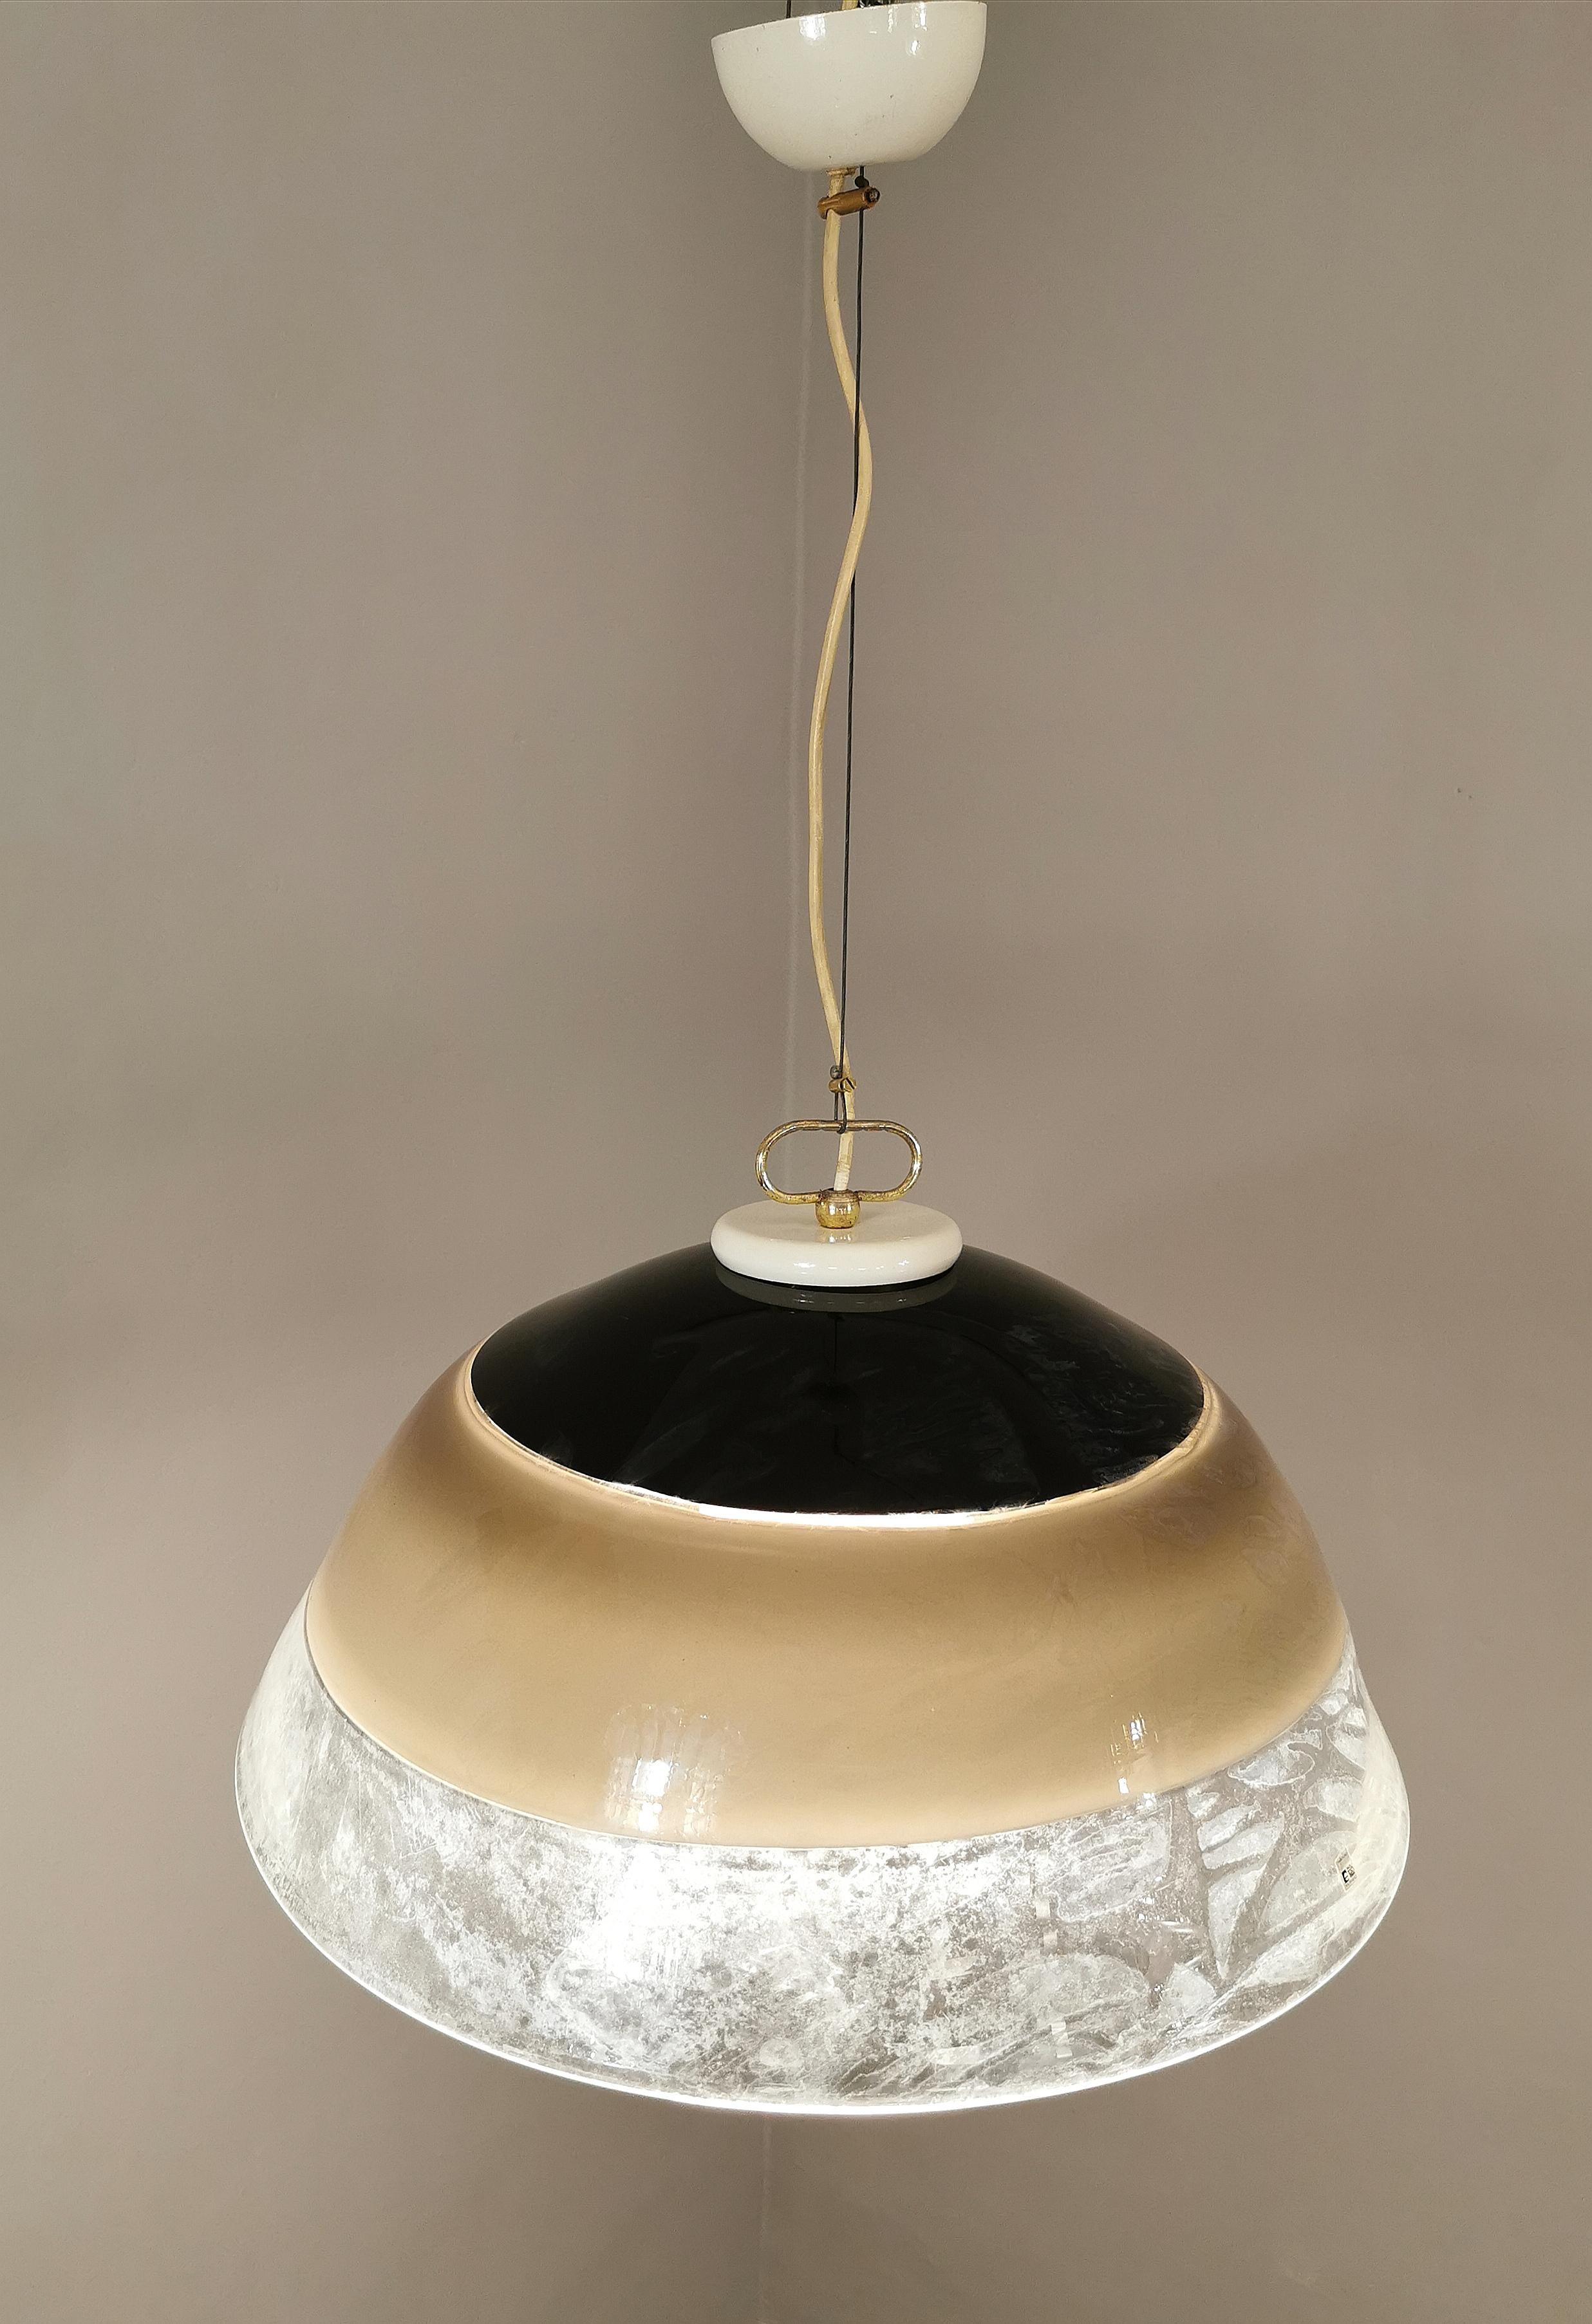 Extraordinary suspension designed in Italy by the Toso brothers and produced by Leucos during the 70s. The large-sized suspension has a 3 incalmo Murano glass, which is one of the most complex processing techniques which consists in the hot coupling